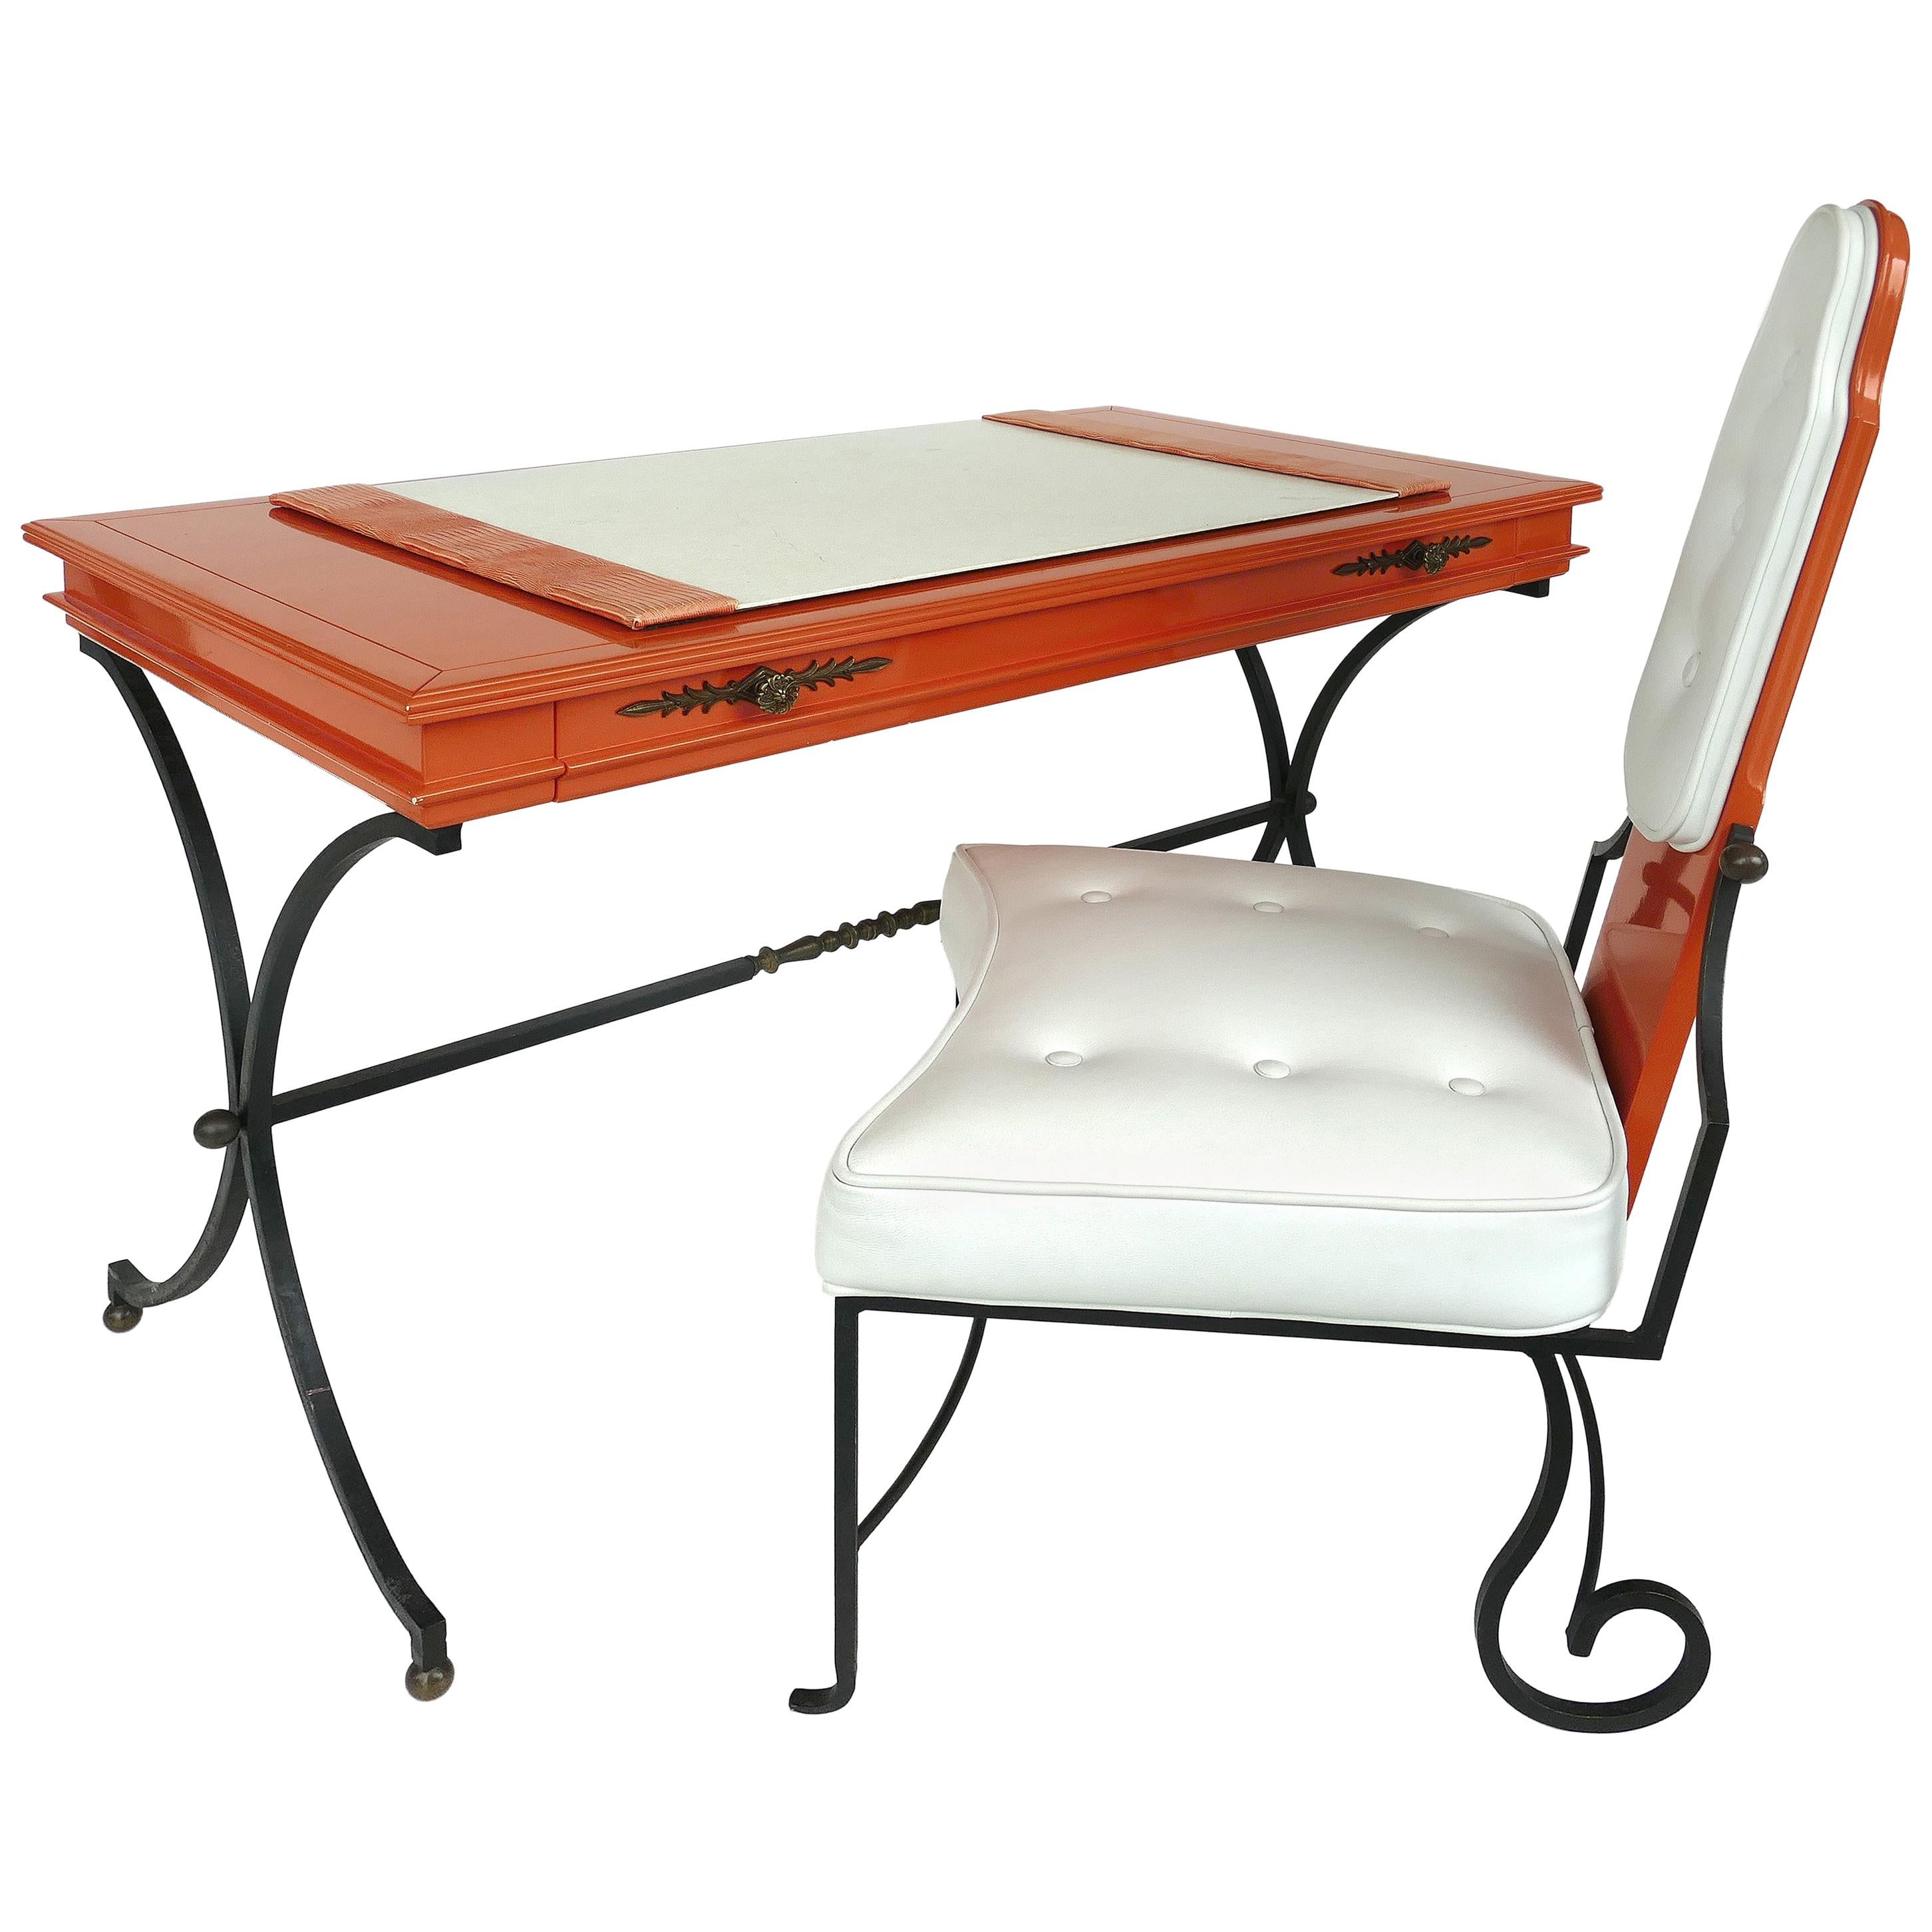 Italian Orange Lacquer Wrought Iron Desk and Chair Set